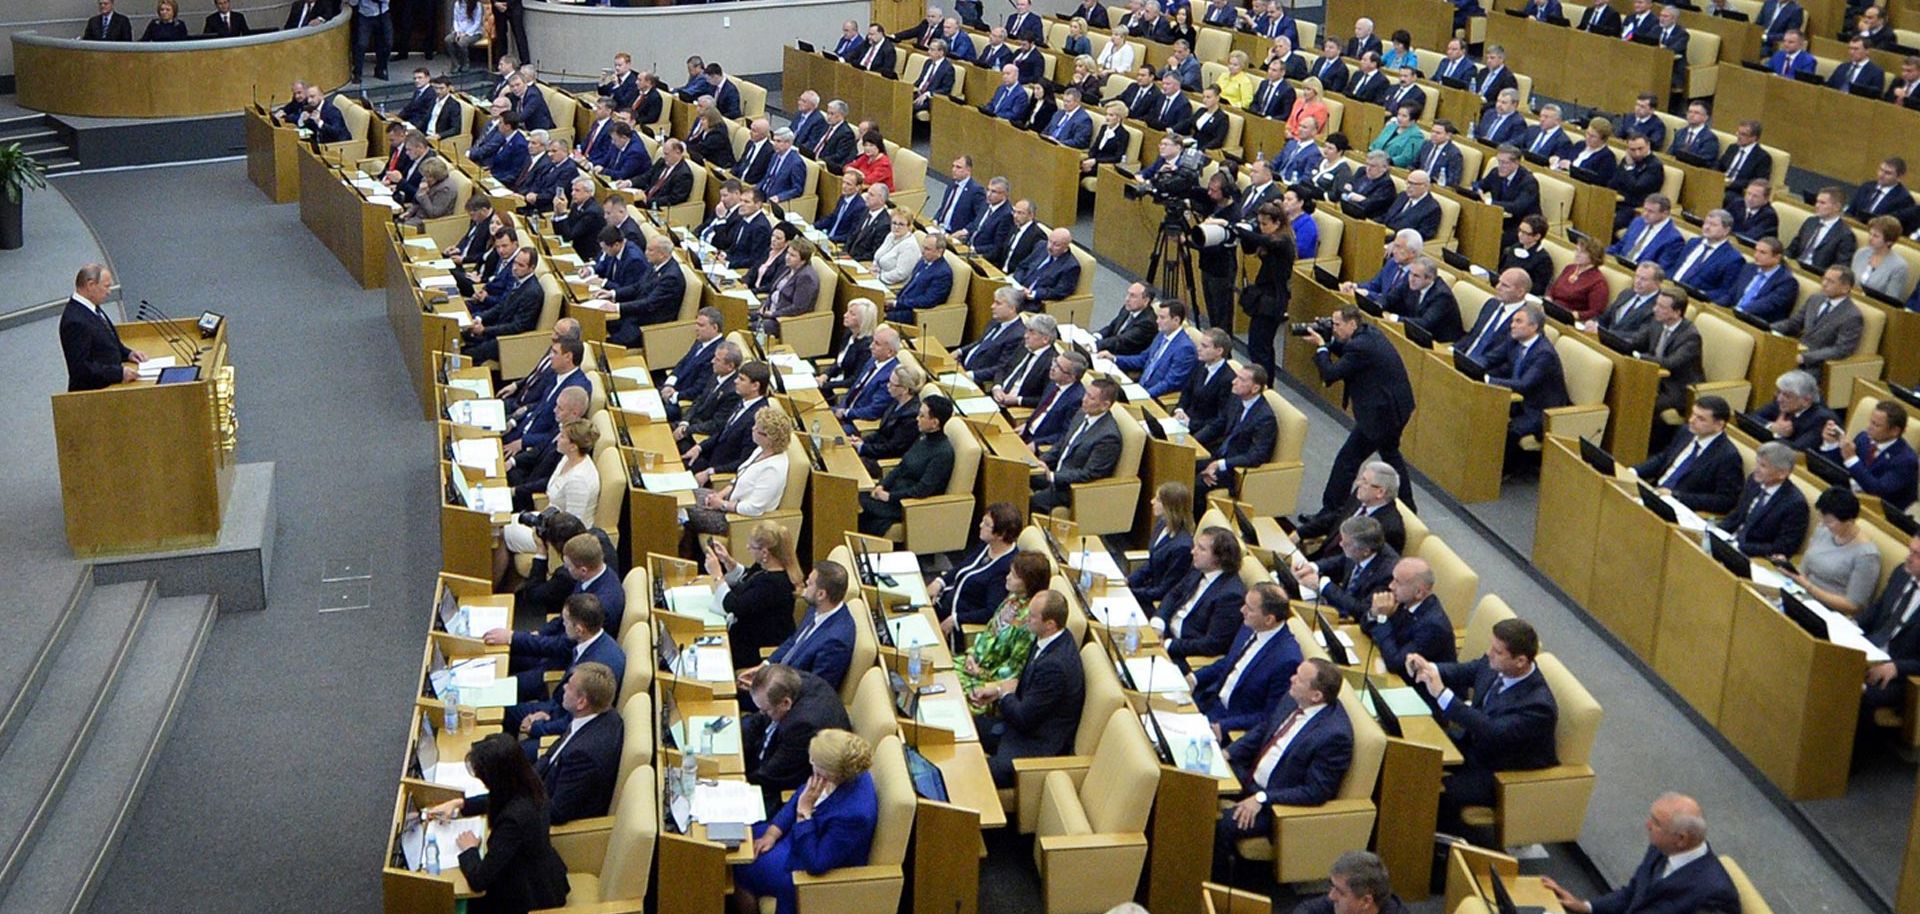 Russia's Federal Budget: Better Late Than Never